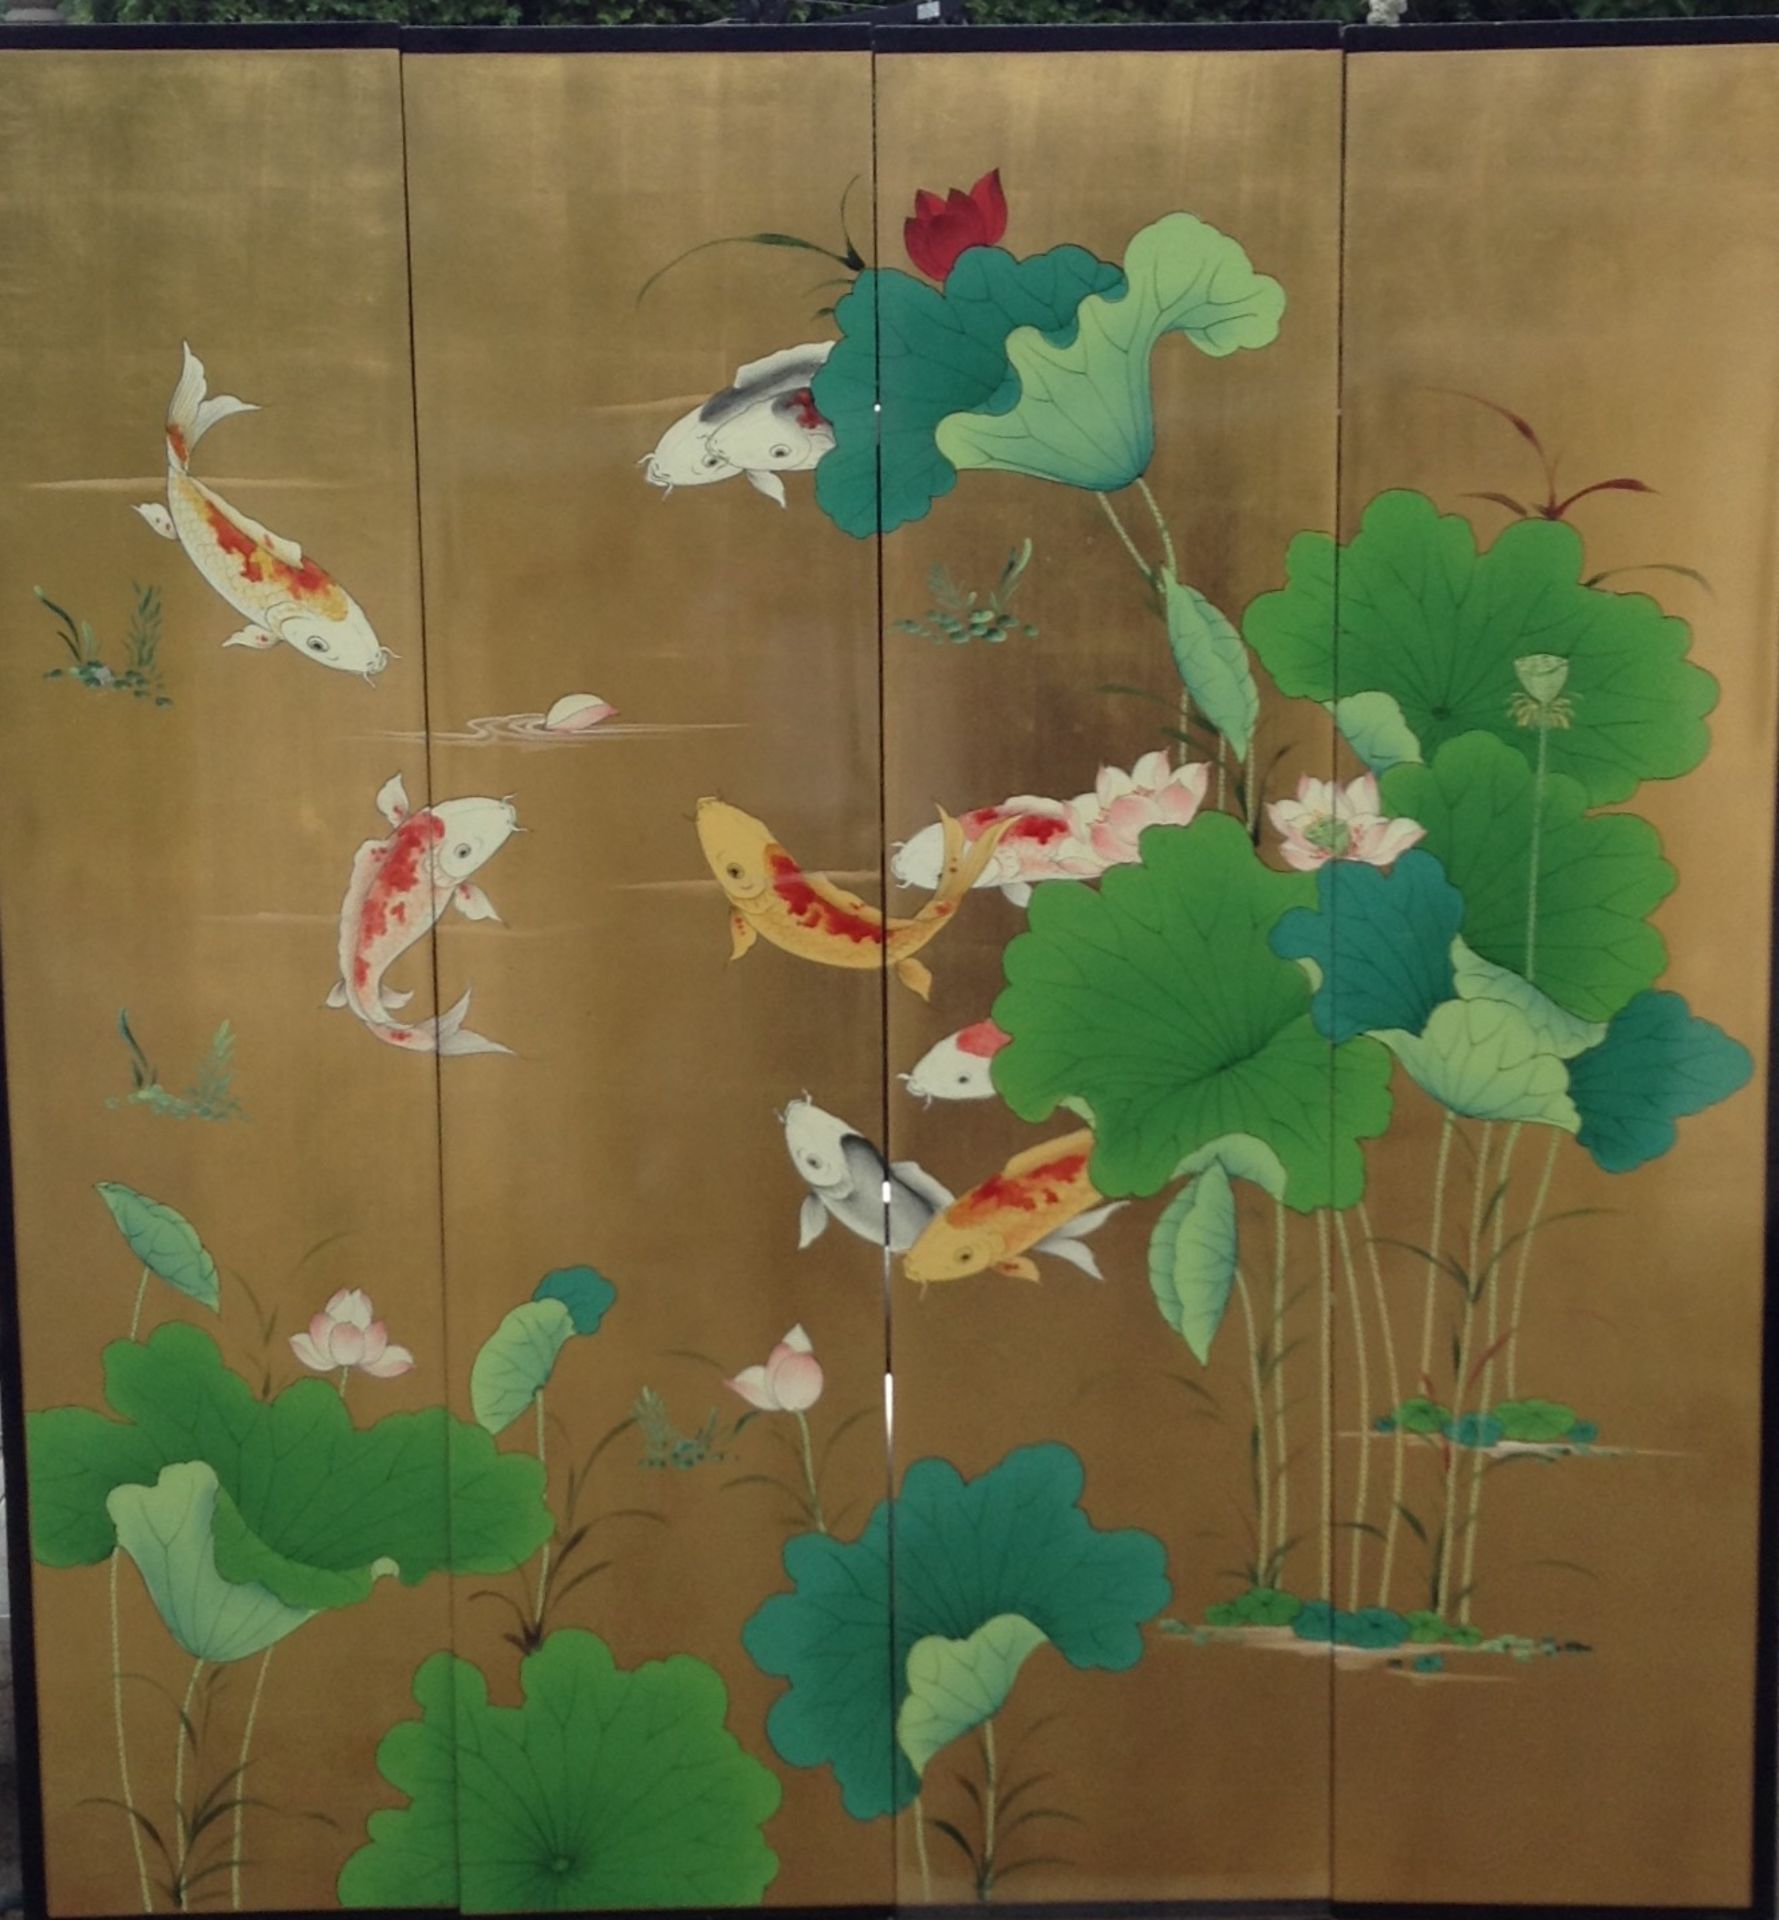 1 x Hand Painted Piece Of Oriental Wall Art Featuring Fish, Set Across 4 Wooden Panels, With a